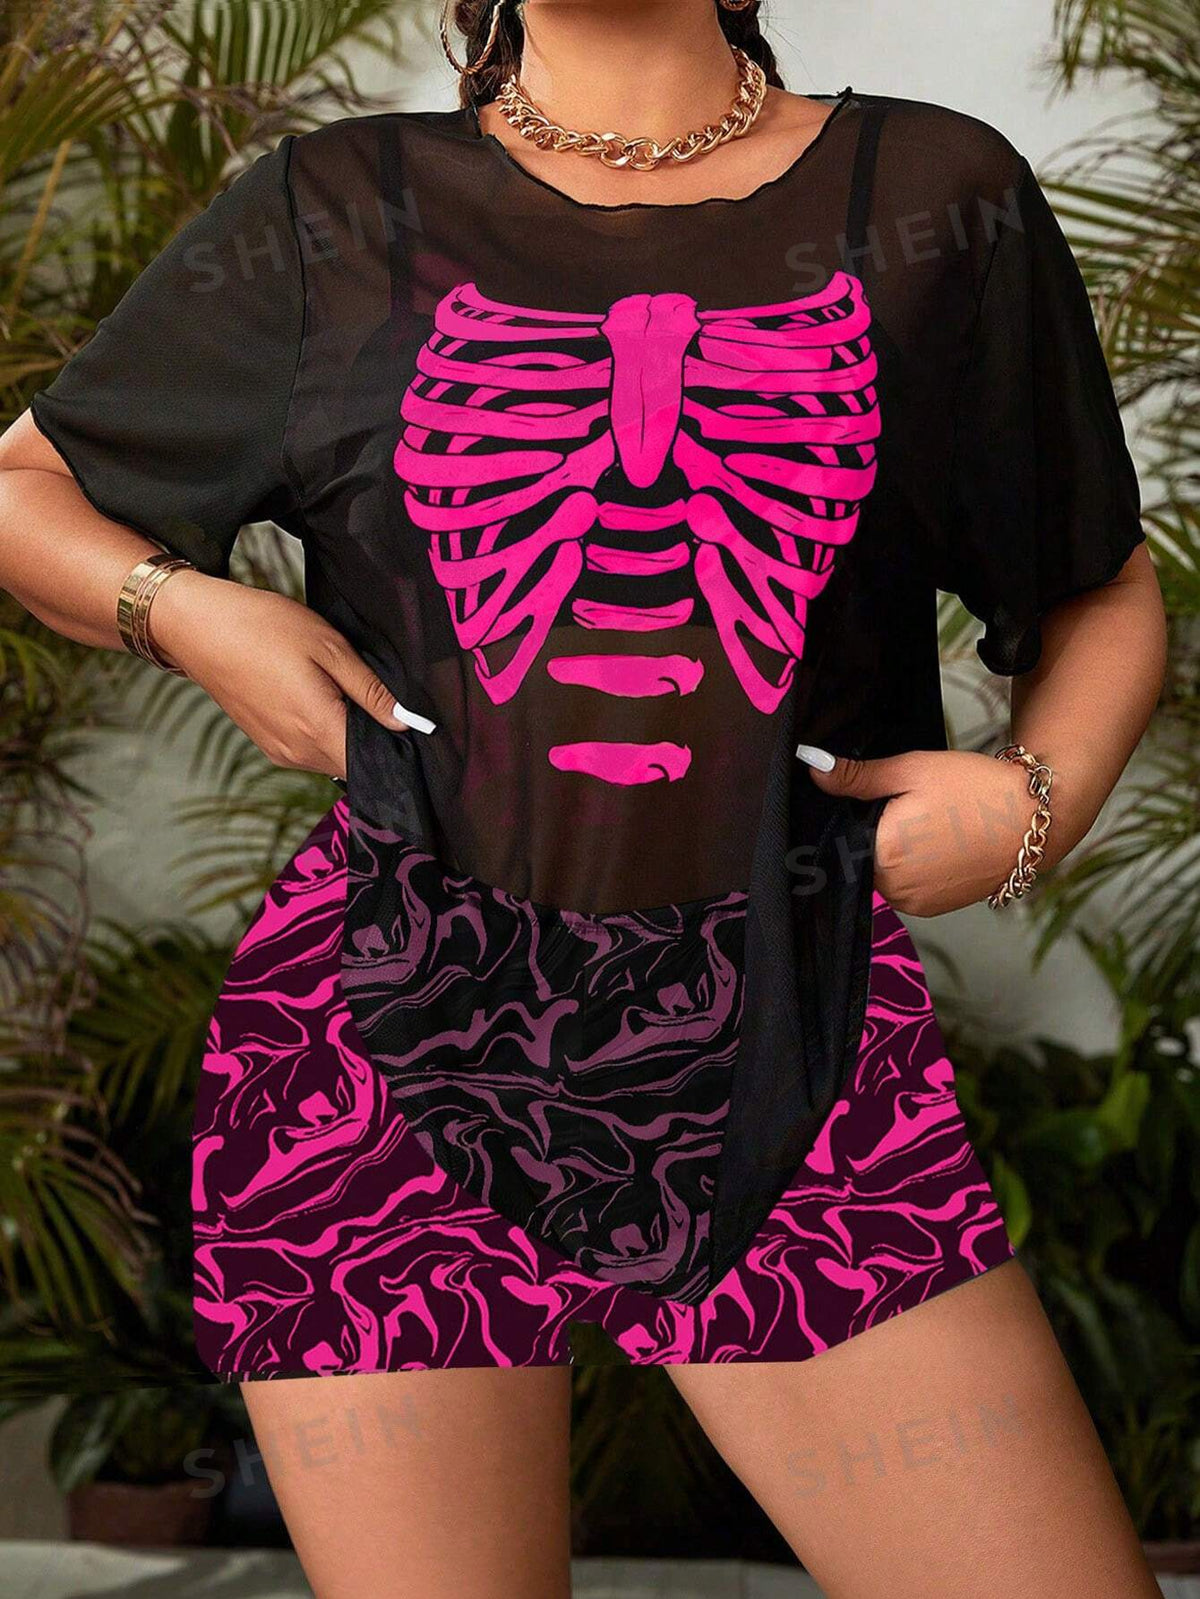 Swim Vcay Plus Size Summer Beach Cami Tankini Set With Skull Print Cover-Up